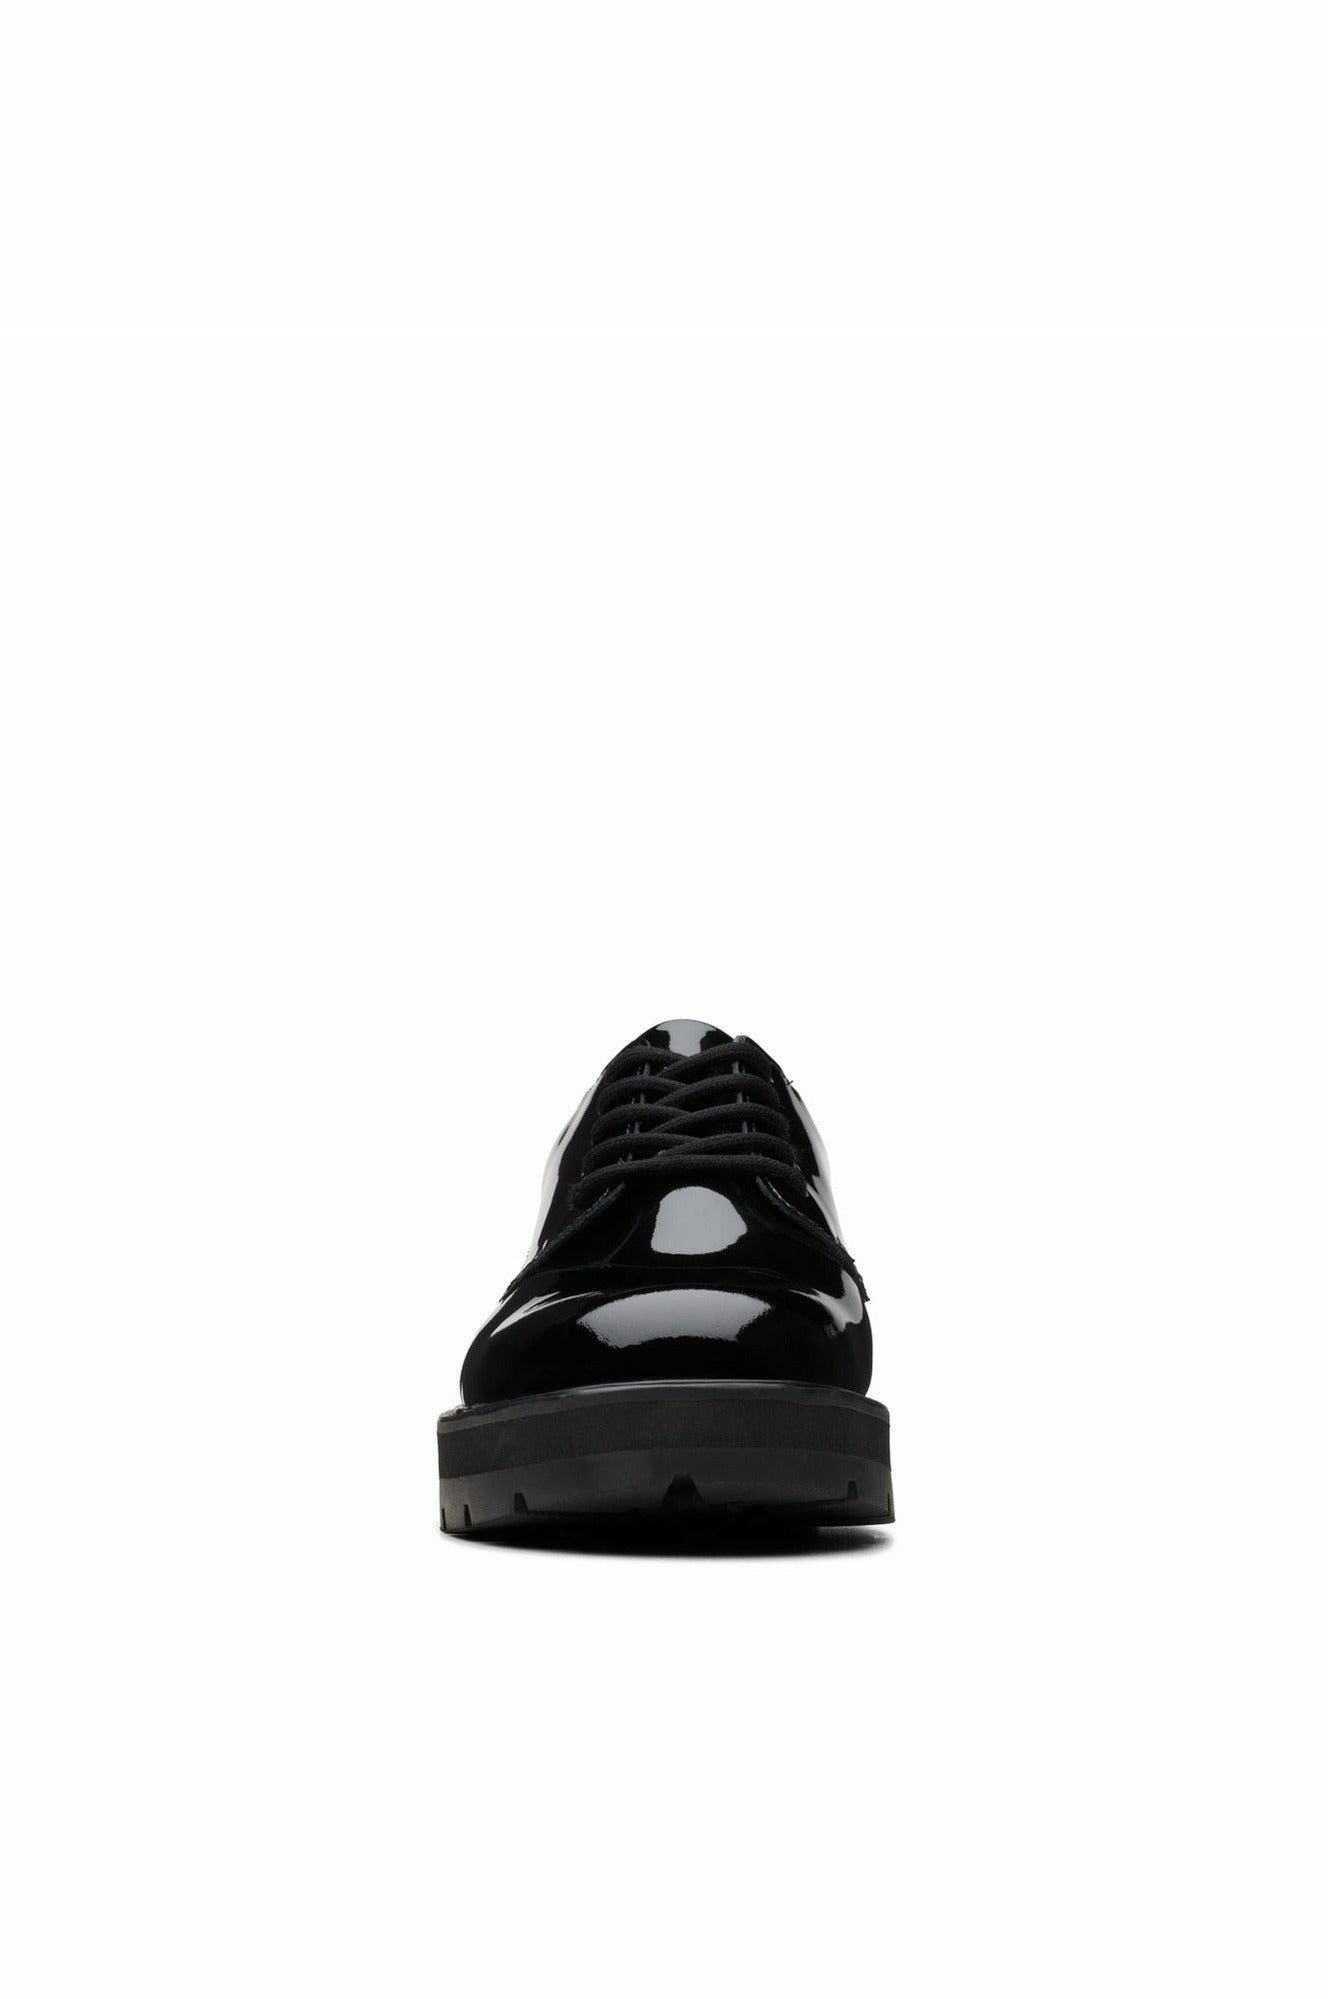 Clarks Prague Lace Youth in Black Patent